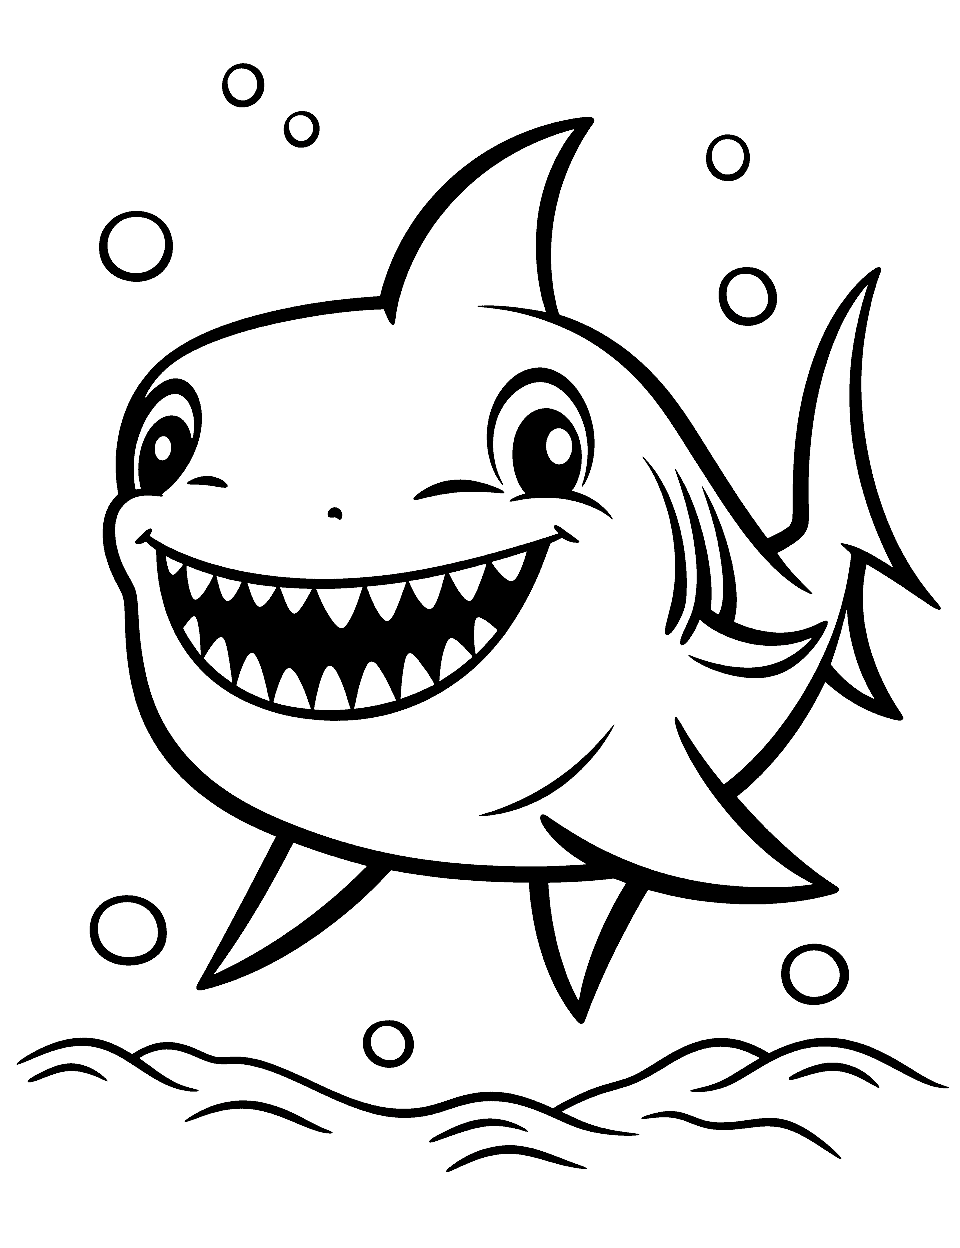 Shark coloring pages free printable sheets